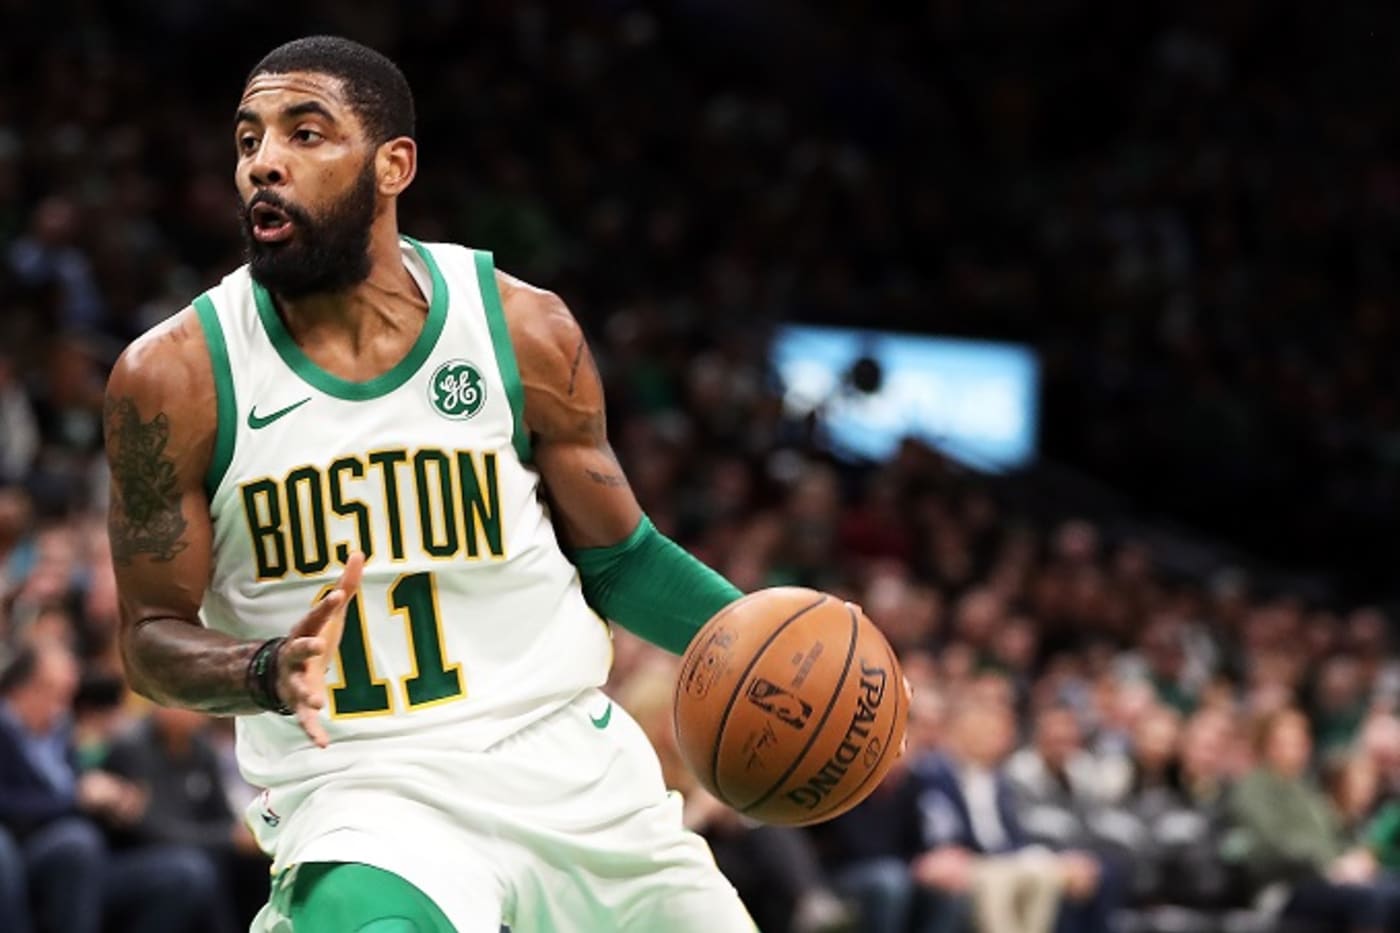 kyrie irving images